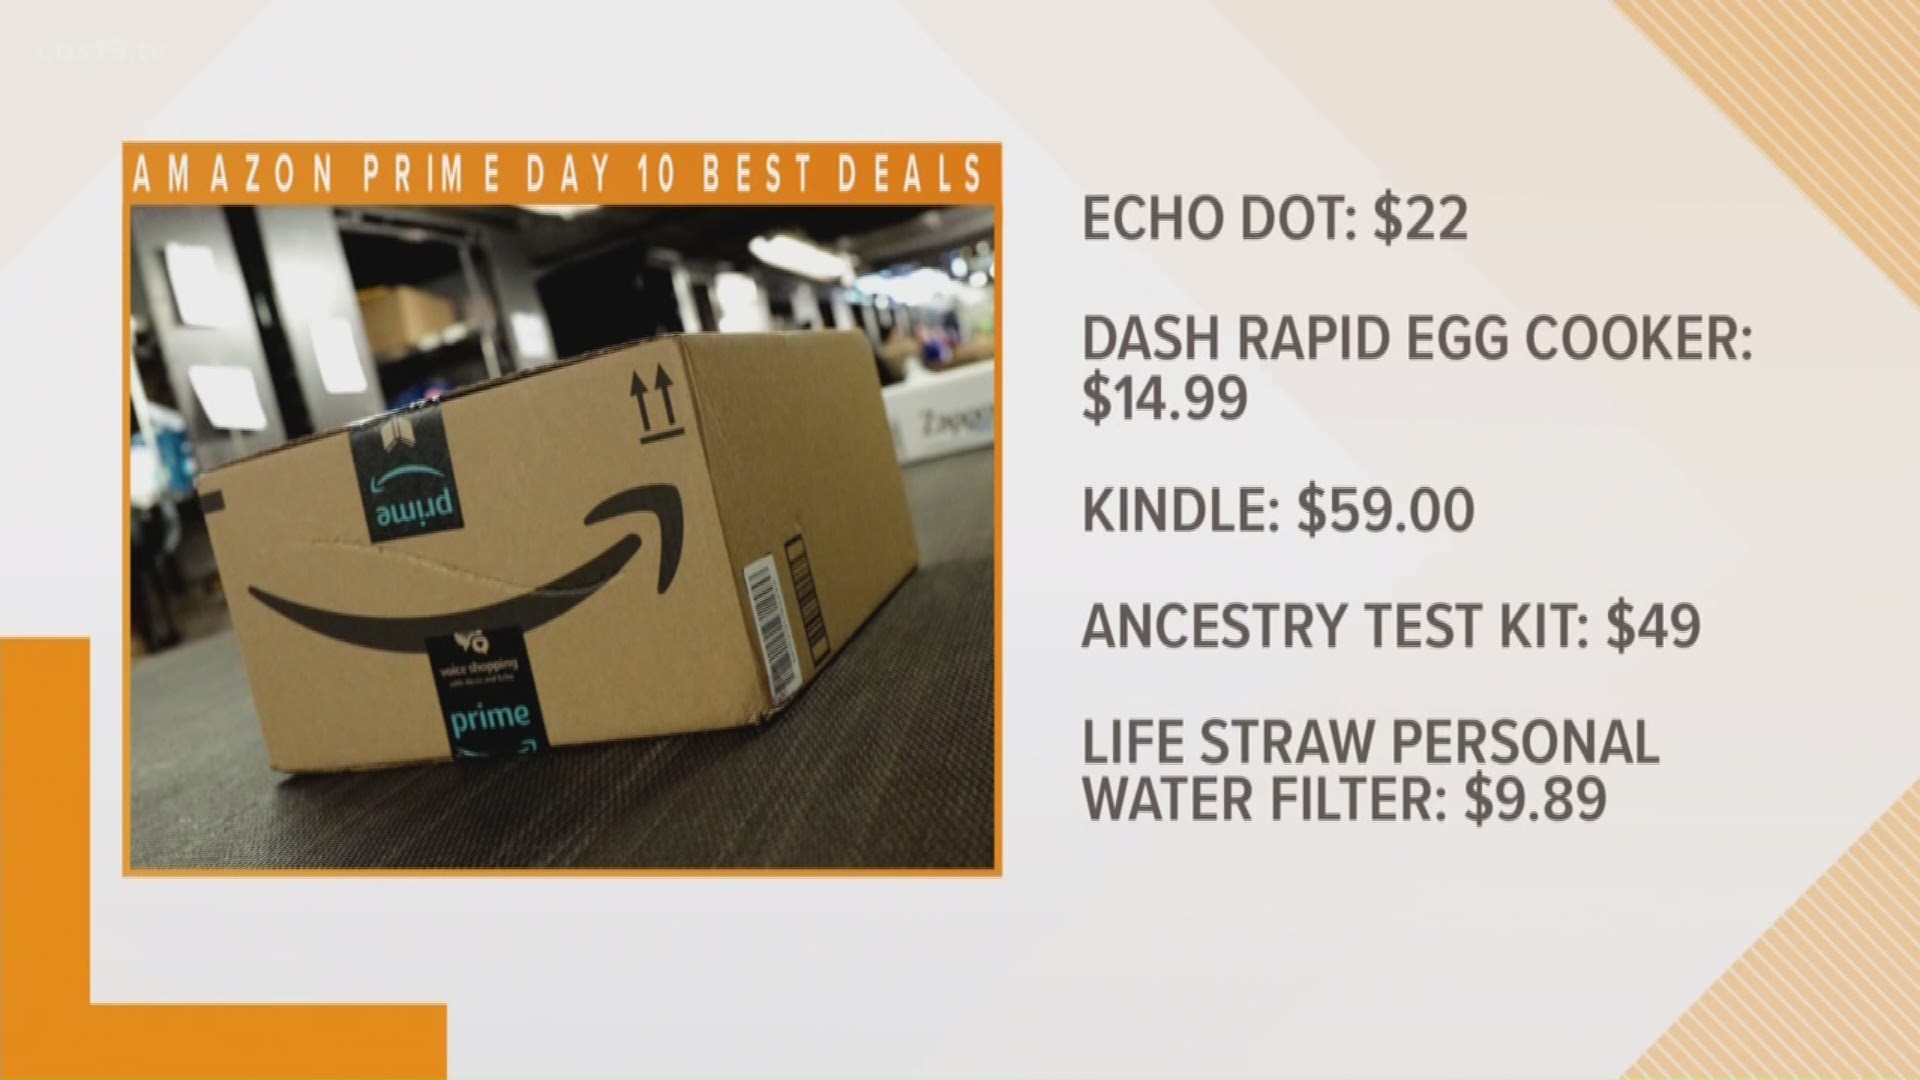 A look at some of the deals on Amazon Prime Day. From back to school items to electronics, a breakdown on some Prime Day deals.